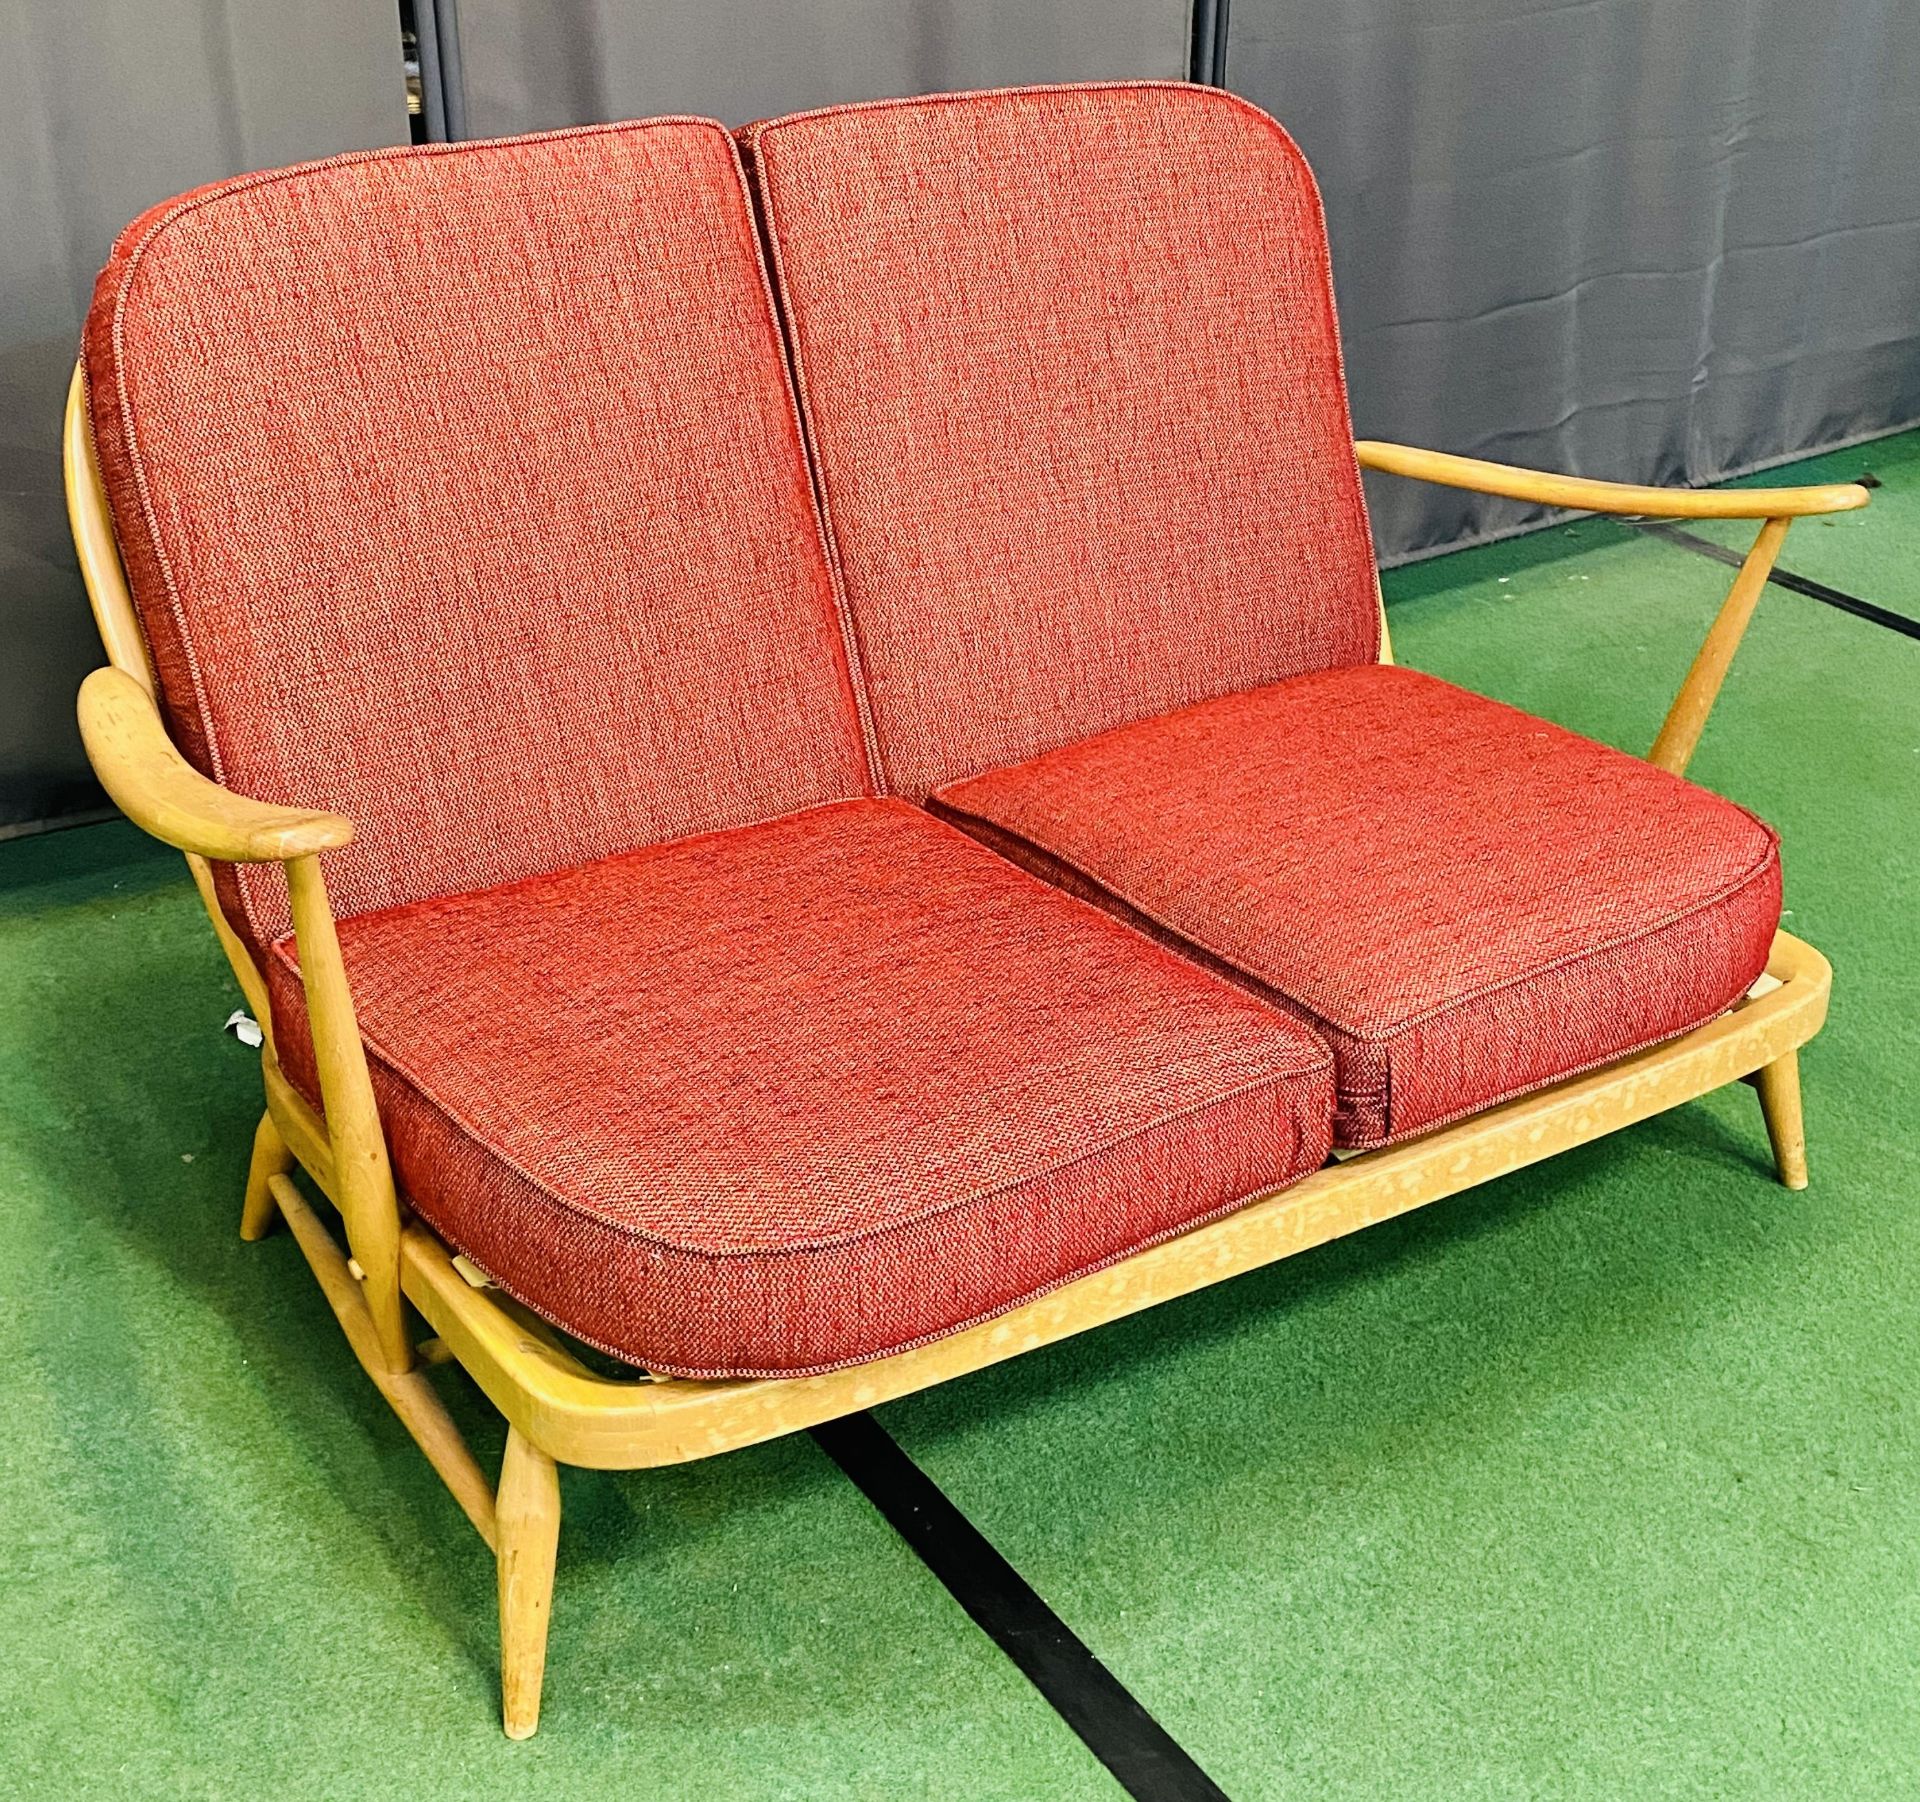 Ercol style spindle back sofa - Image 3 of 4